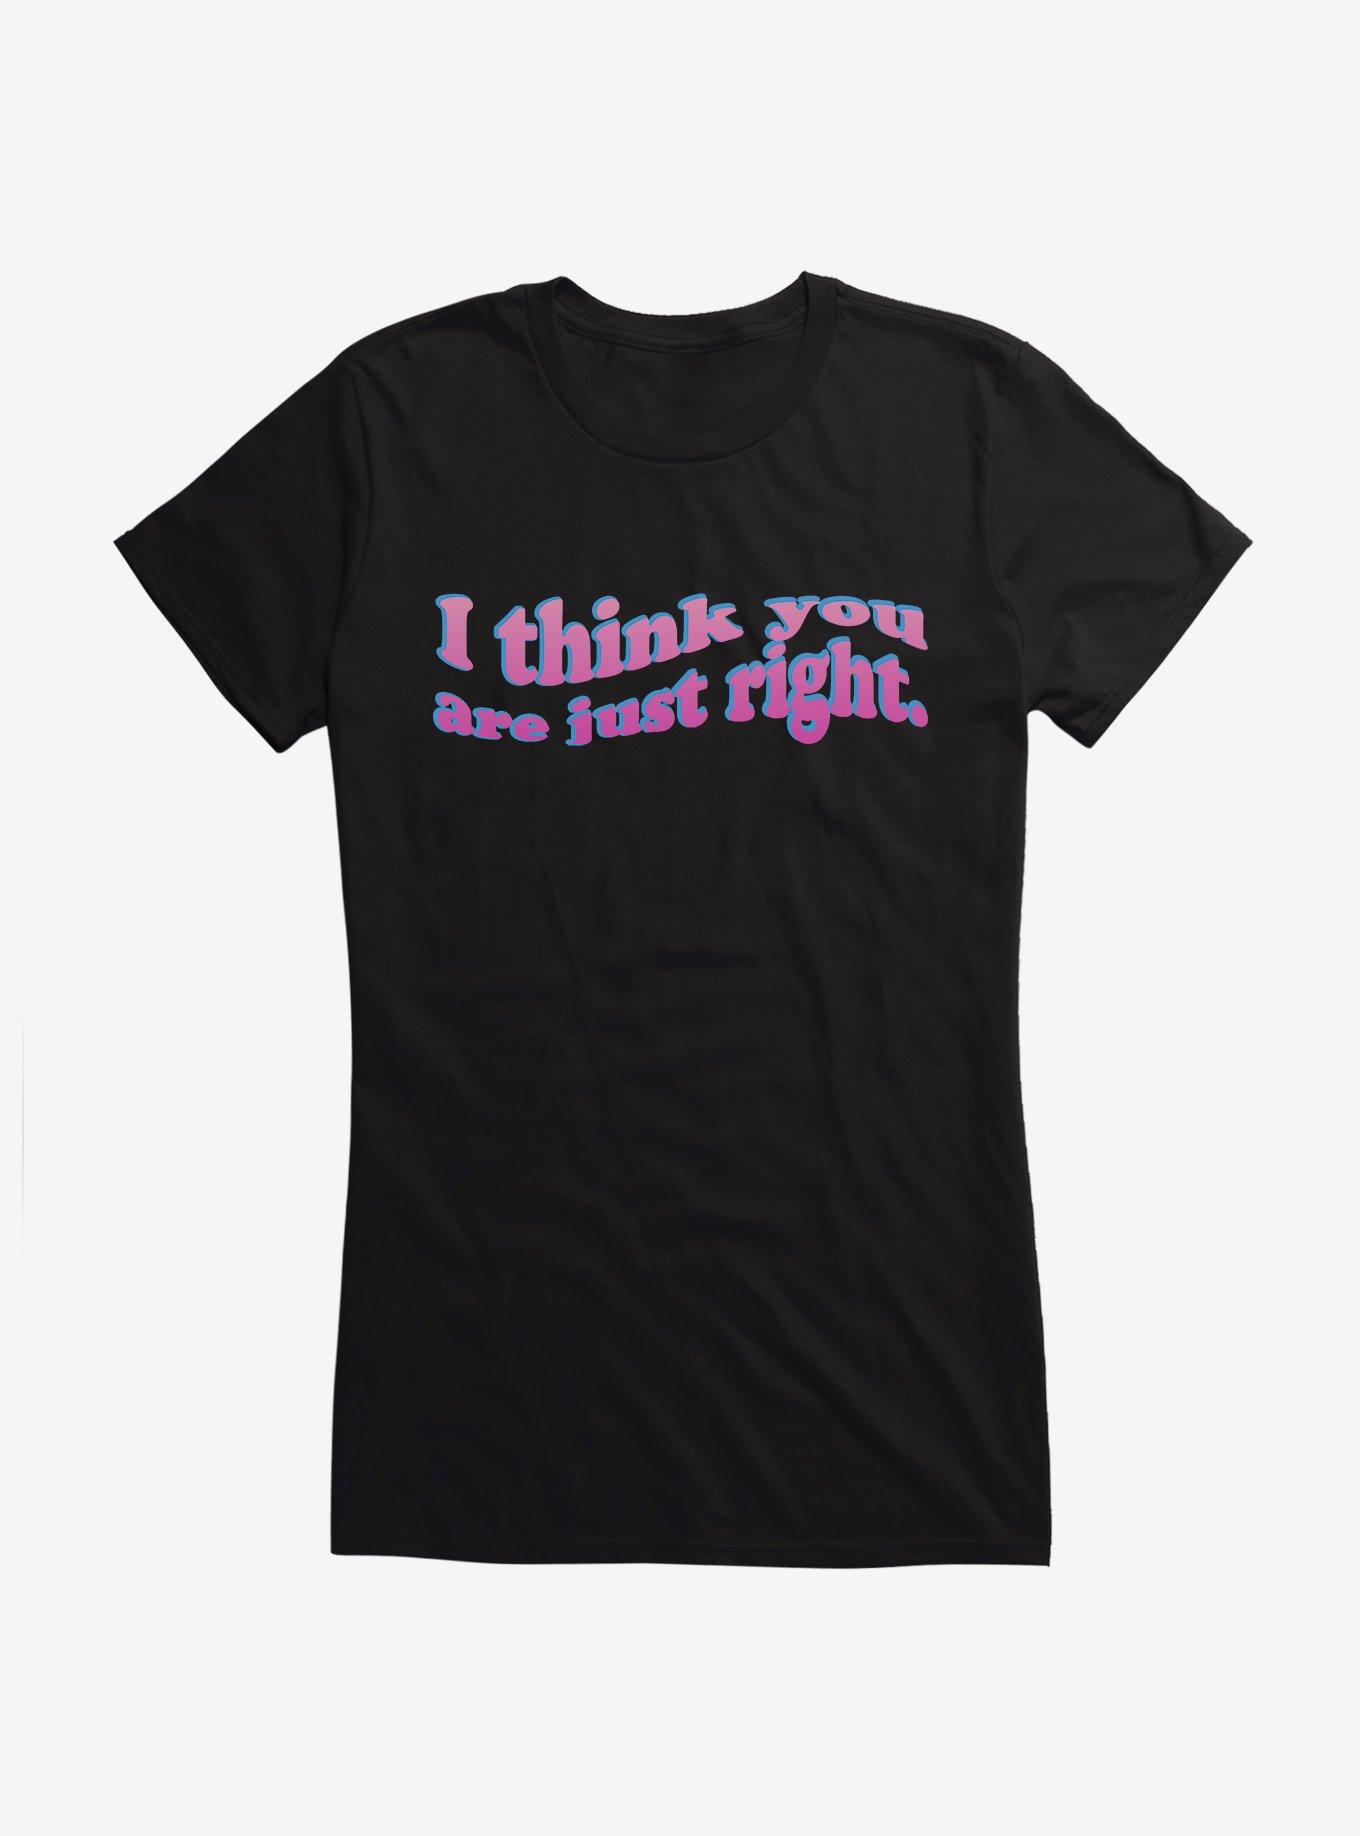 Barbie The Movie Just Right Girls T-Shirt